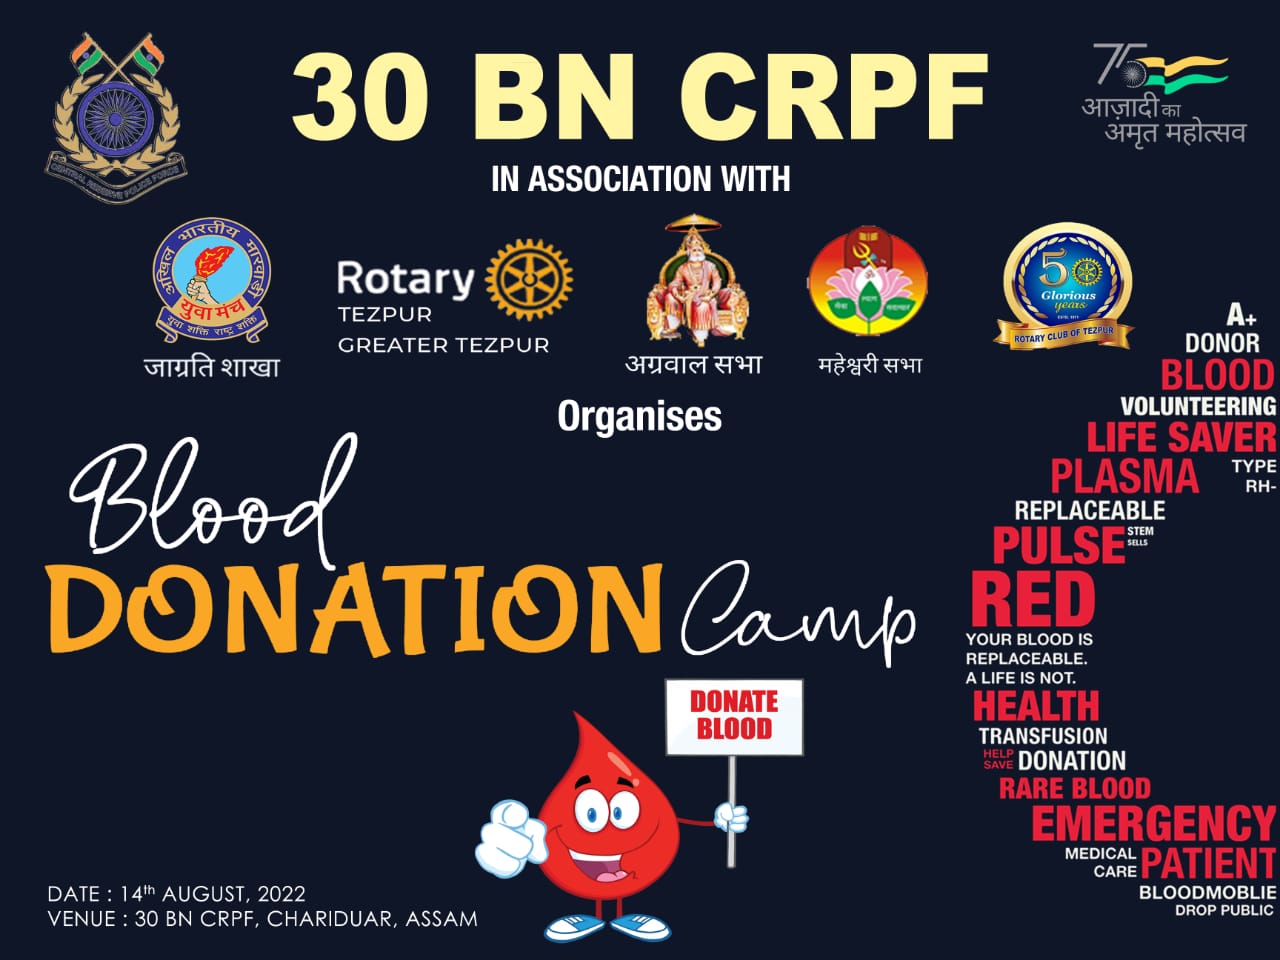 Blood Donation Camp Date : 14-Aug-2022